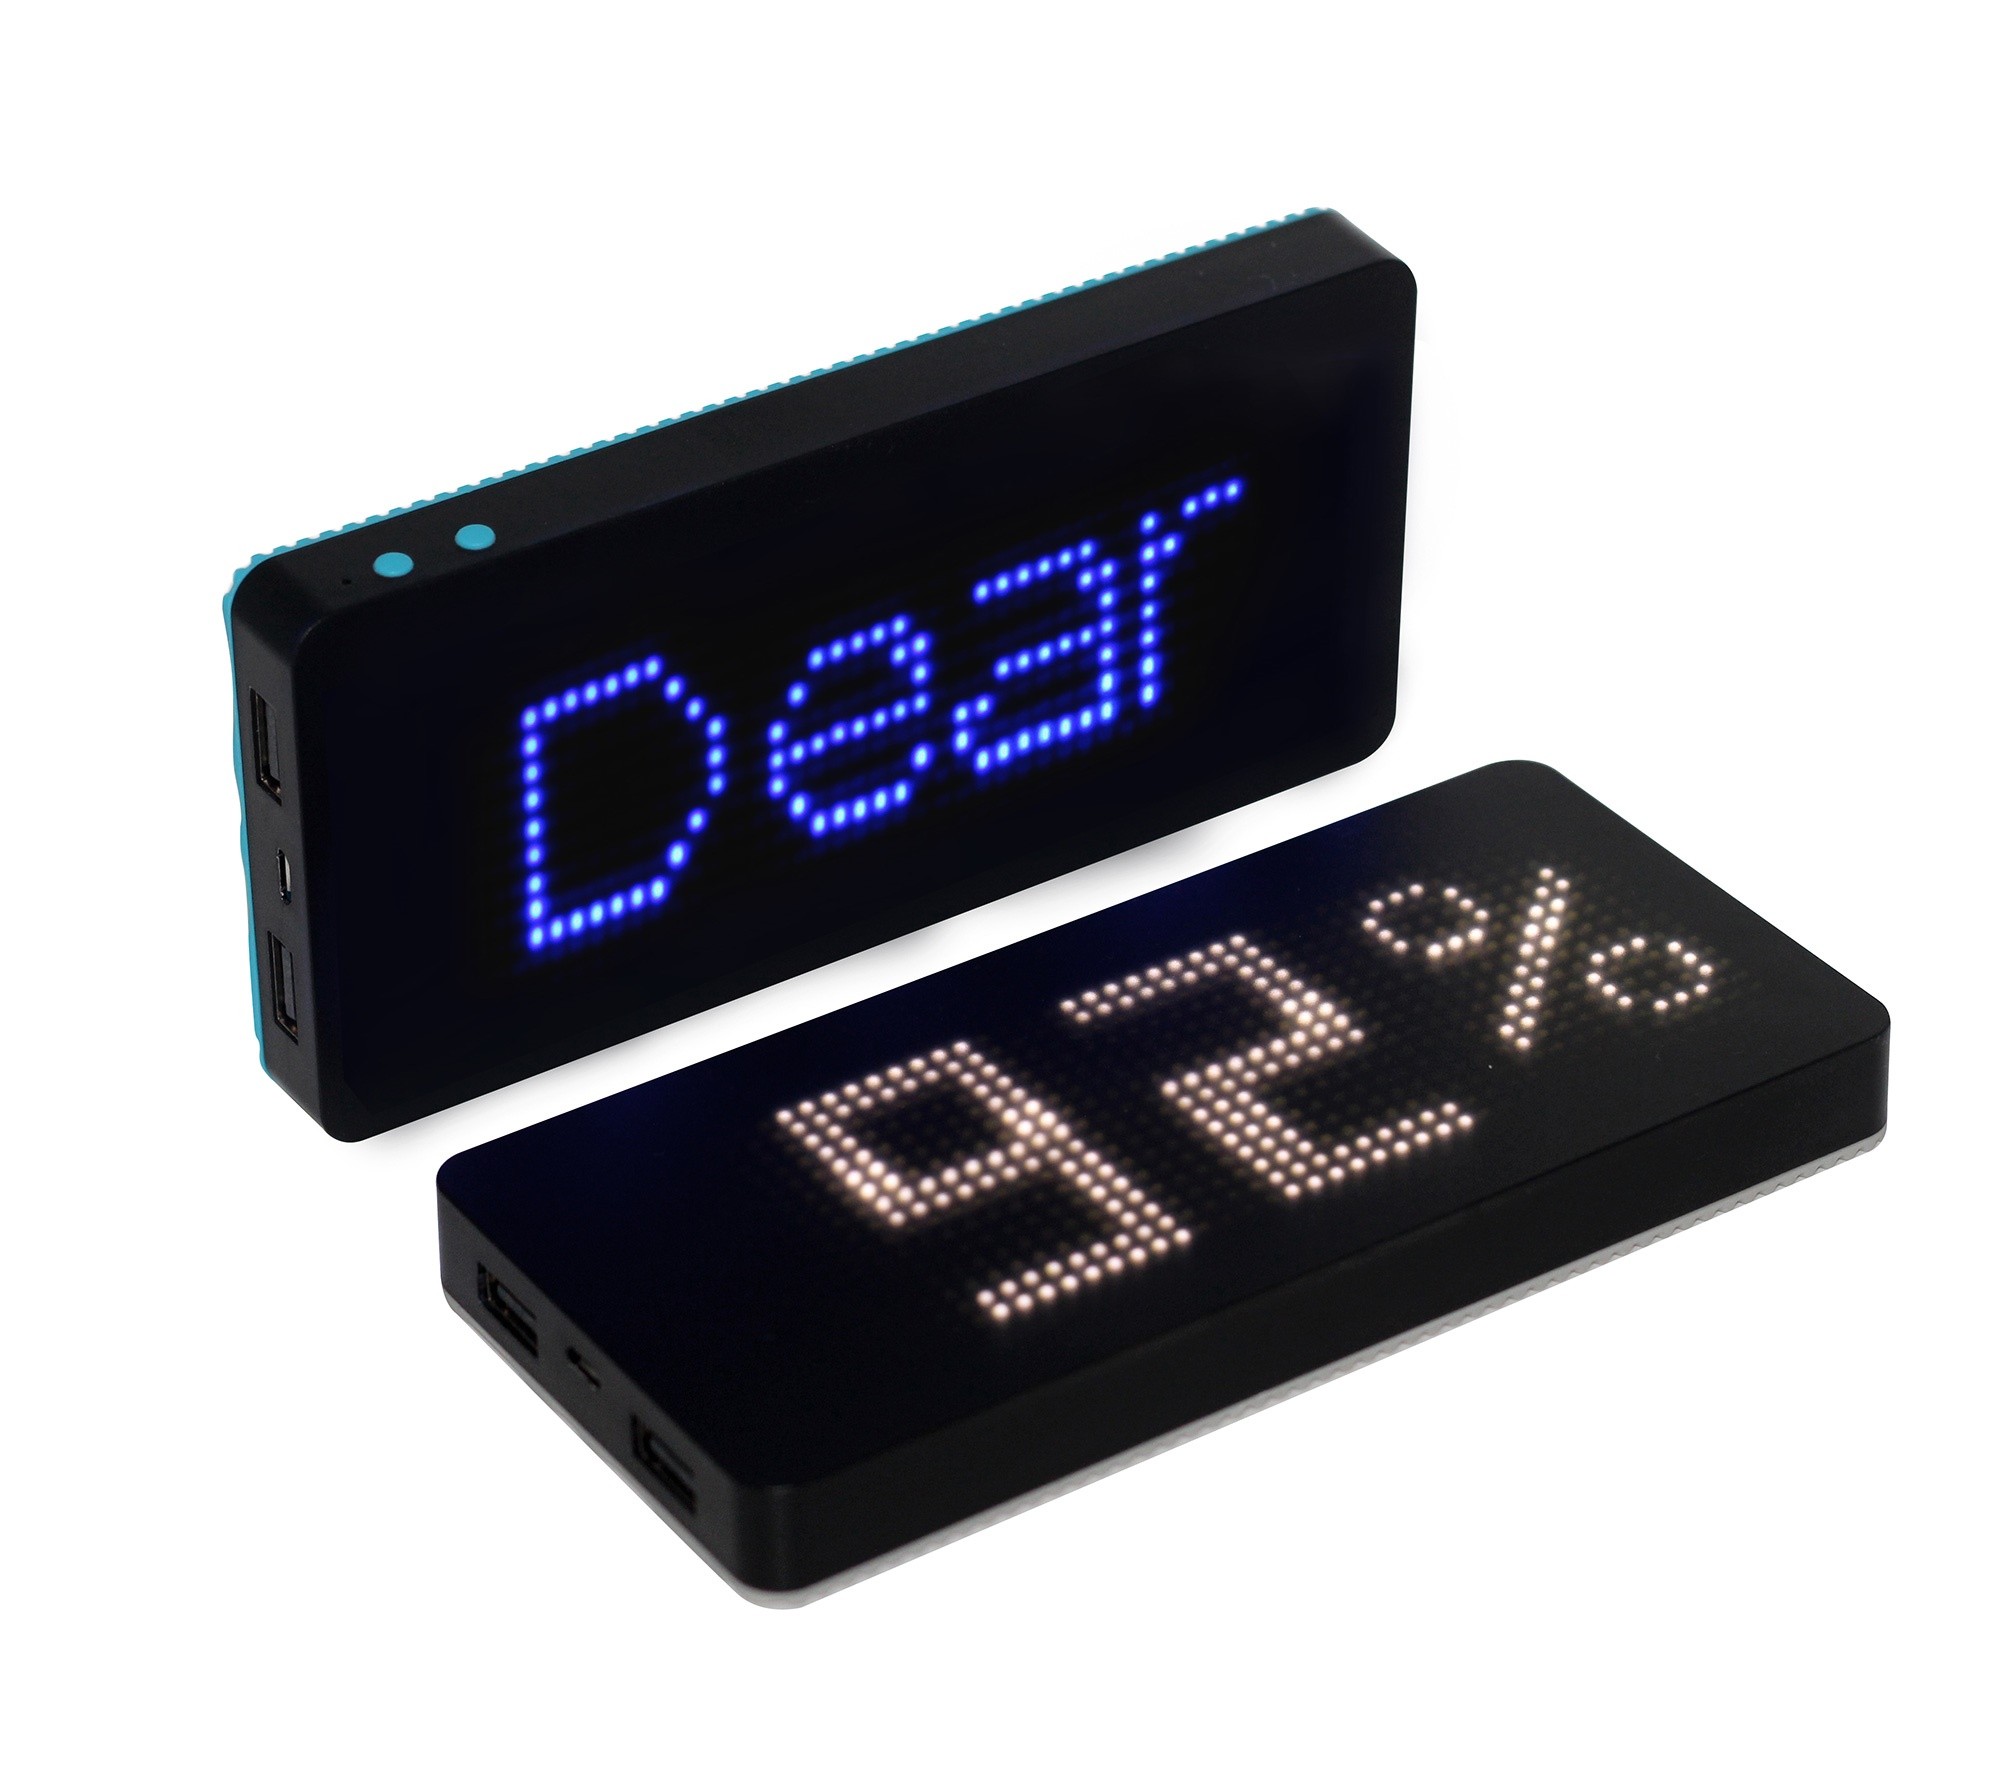 8000 mAh Solar Charger Power Bank with LED Clock